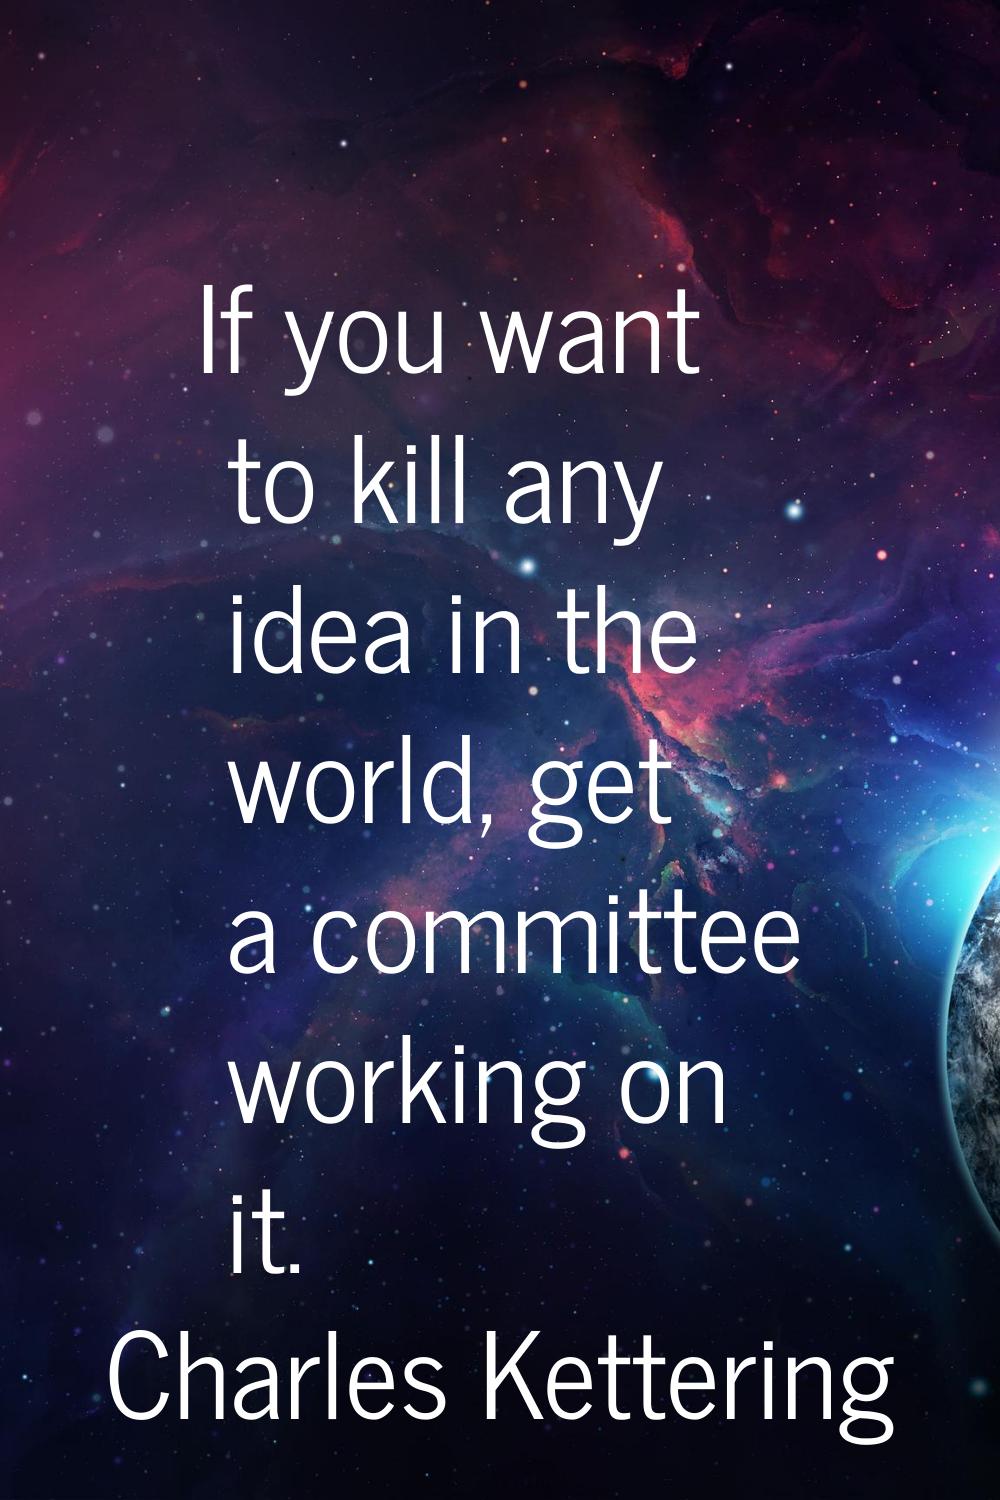 If you want to kill any idea in the world, get a committee working on it.